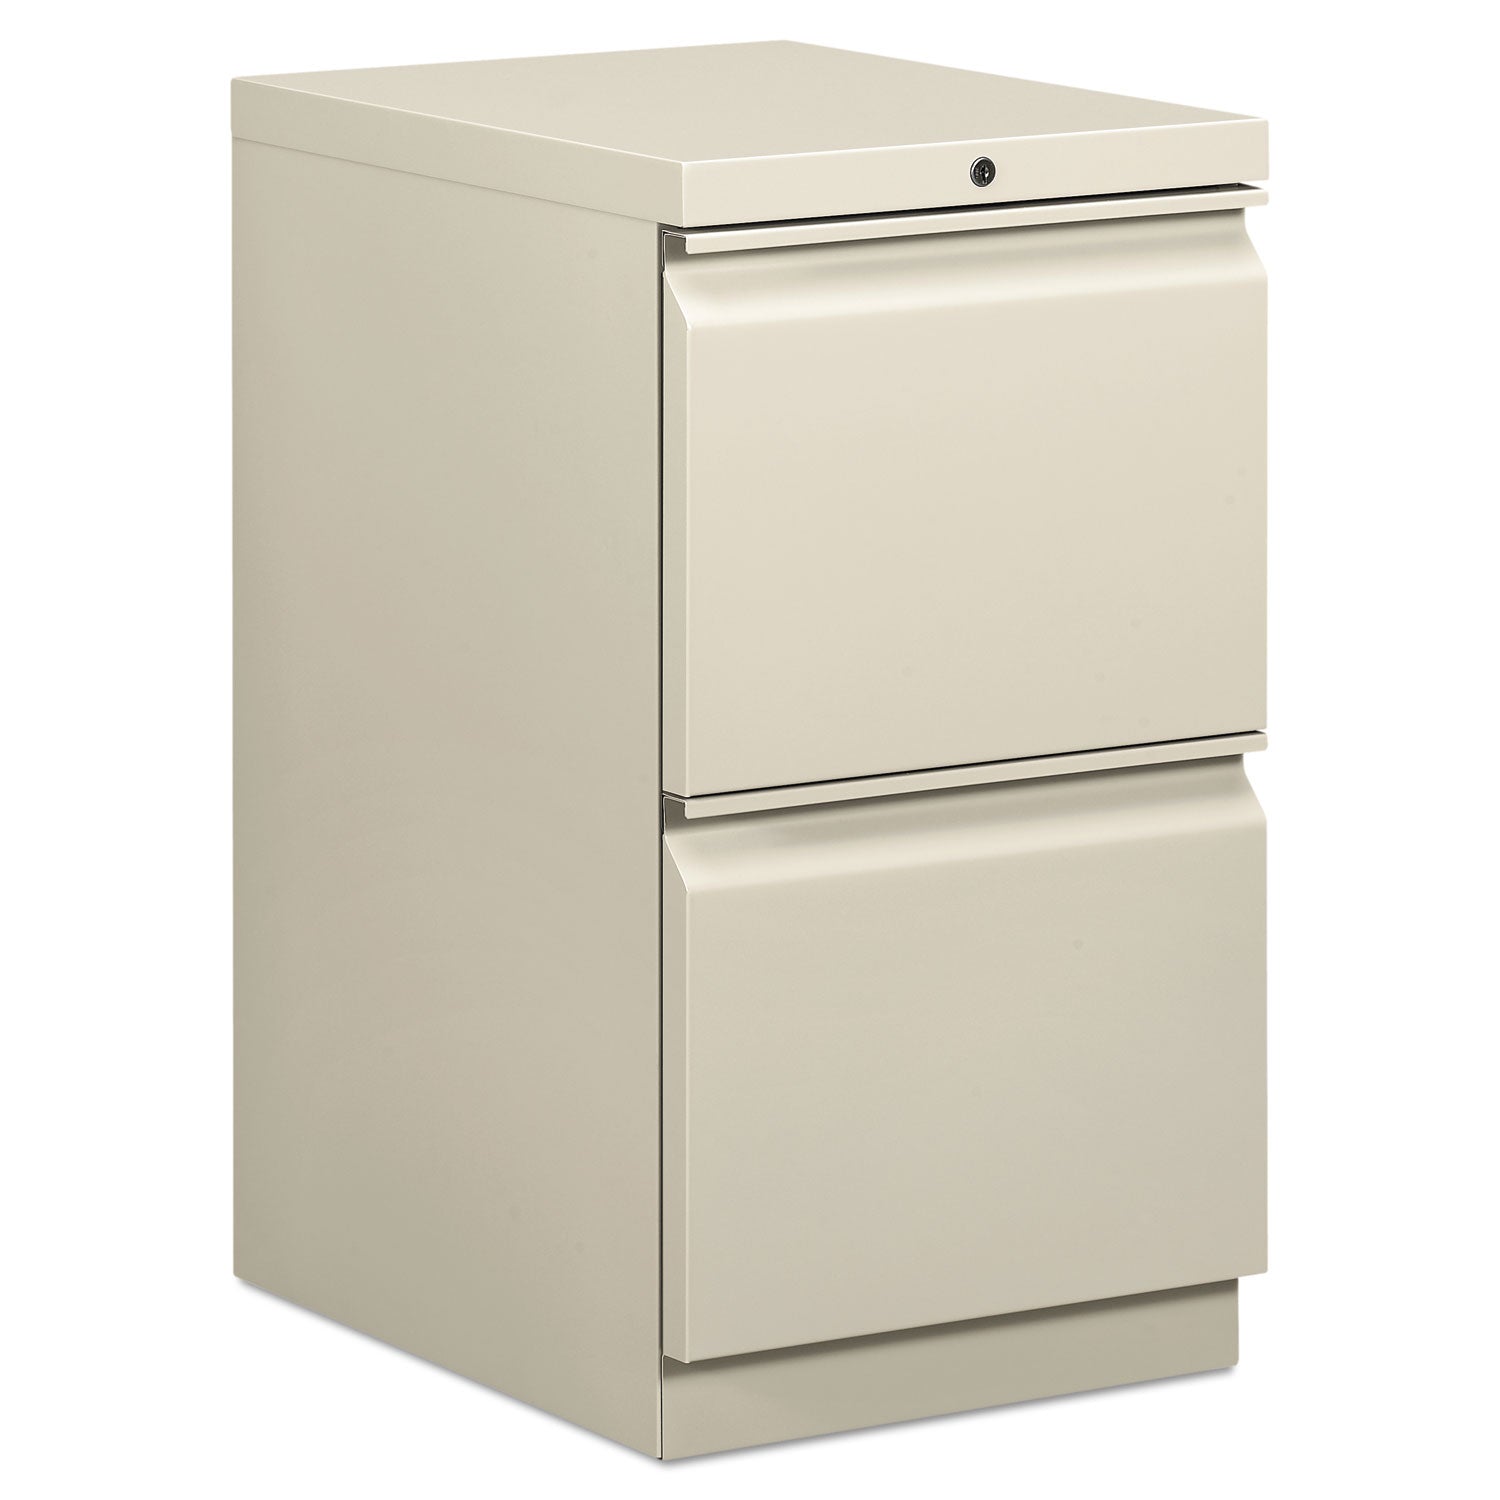 Brigade Mobile Pedestal, Left or Right, 2 Letter-Size File Drawers, Light Gray, 15" x 19.88" x 28 - 